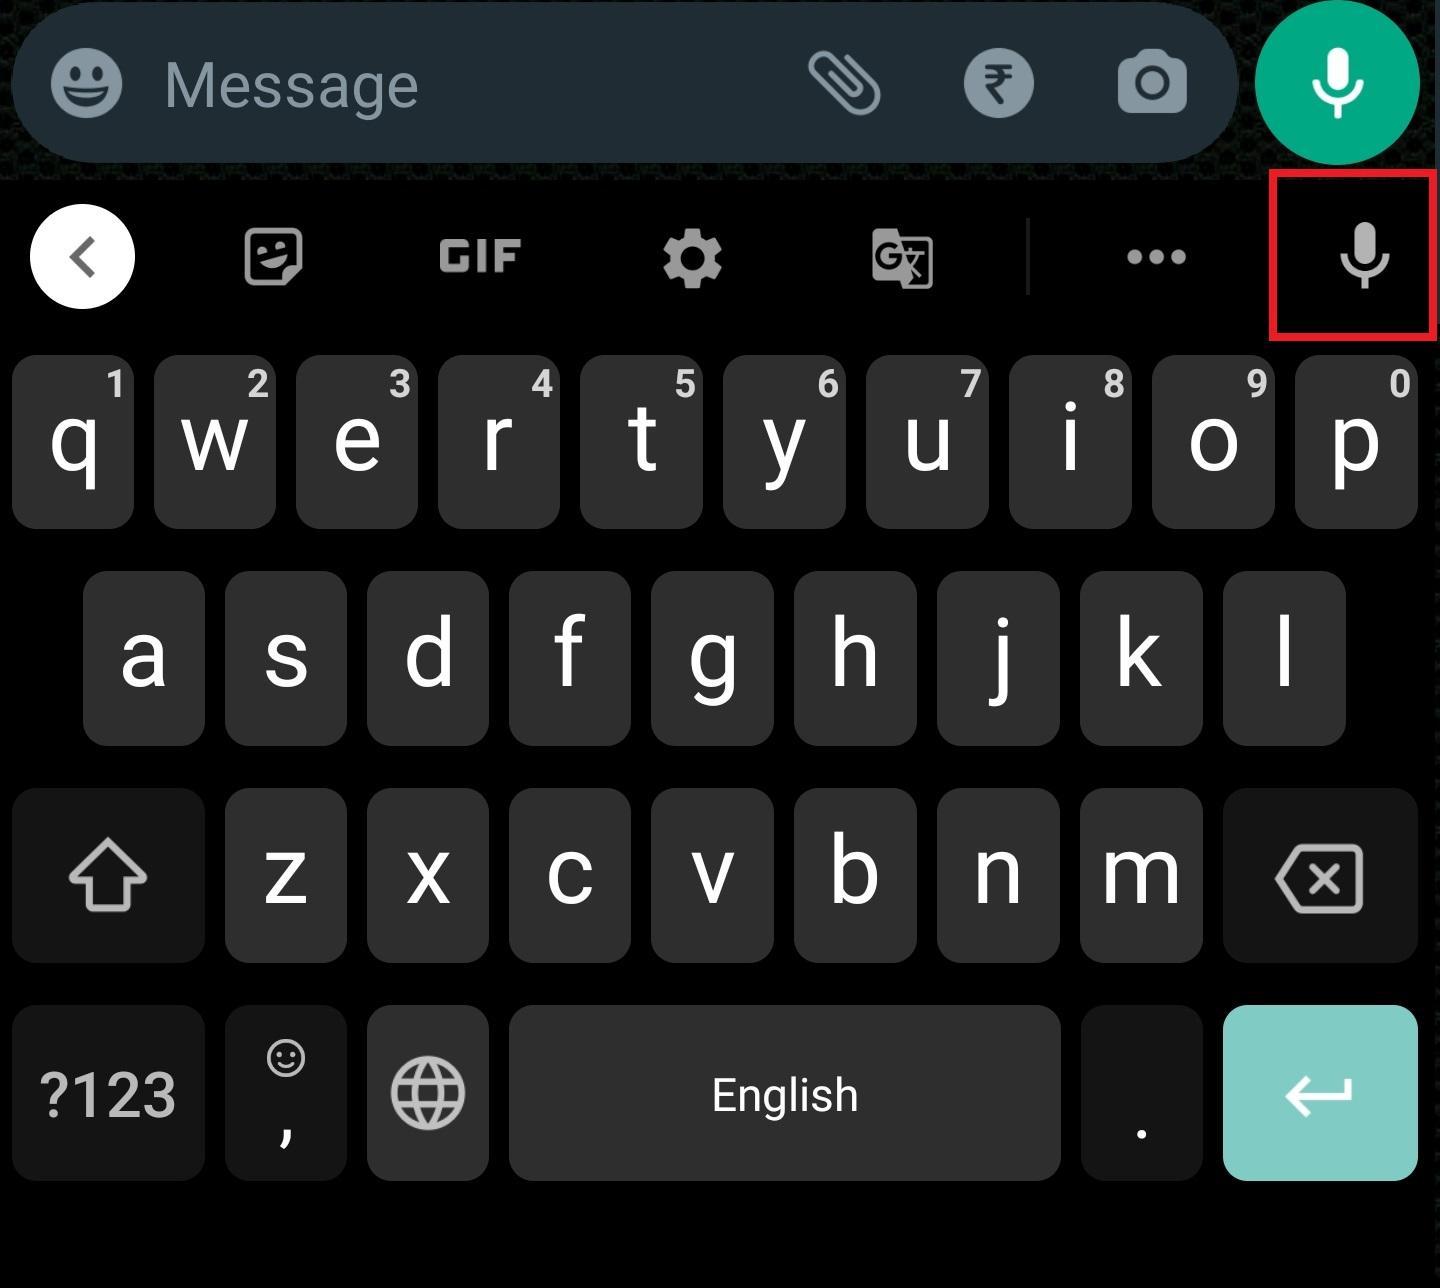 CLick on mic icon on keyboard